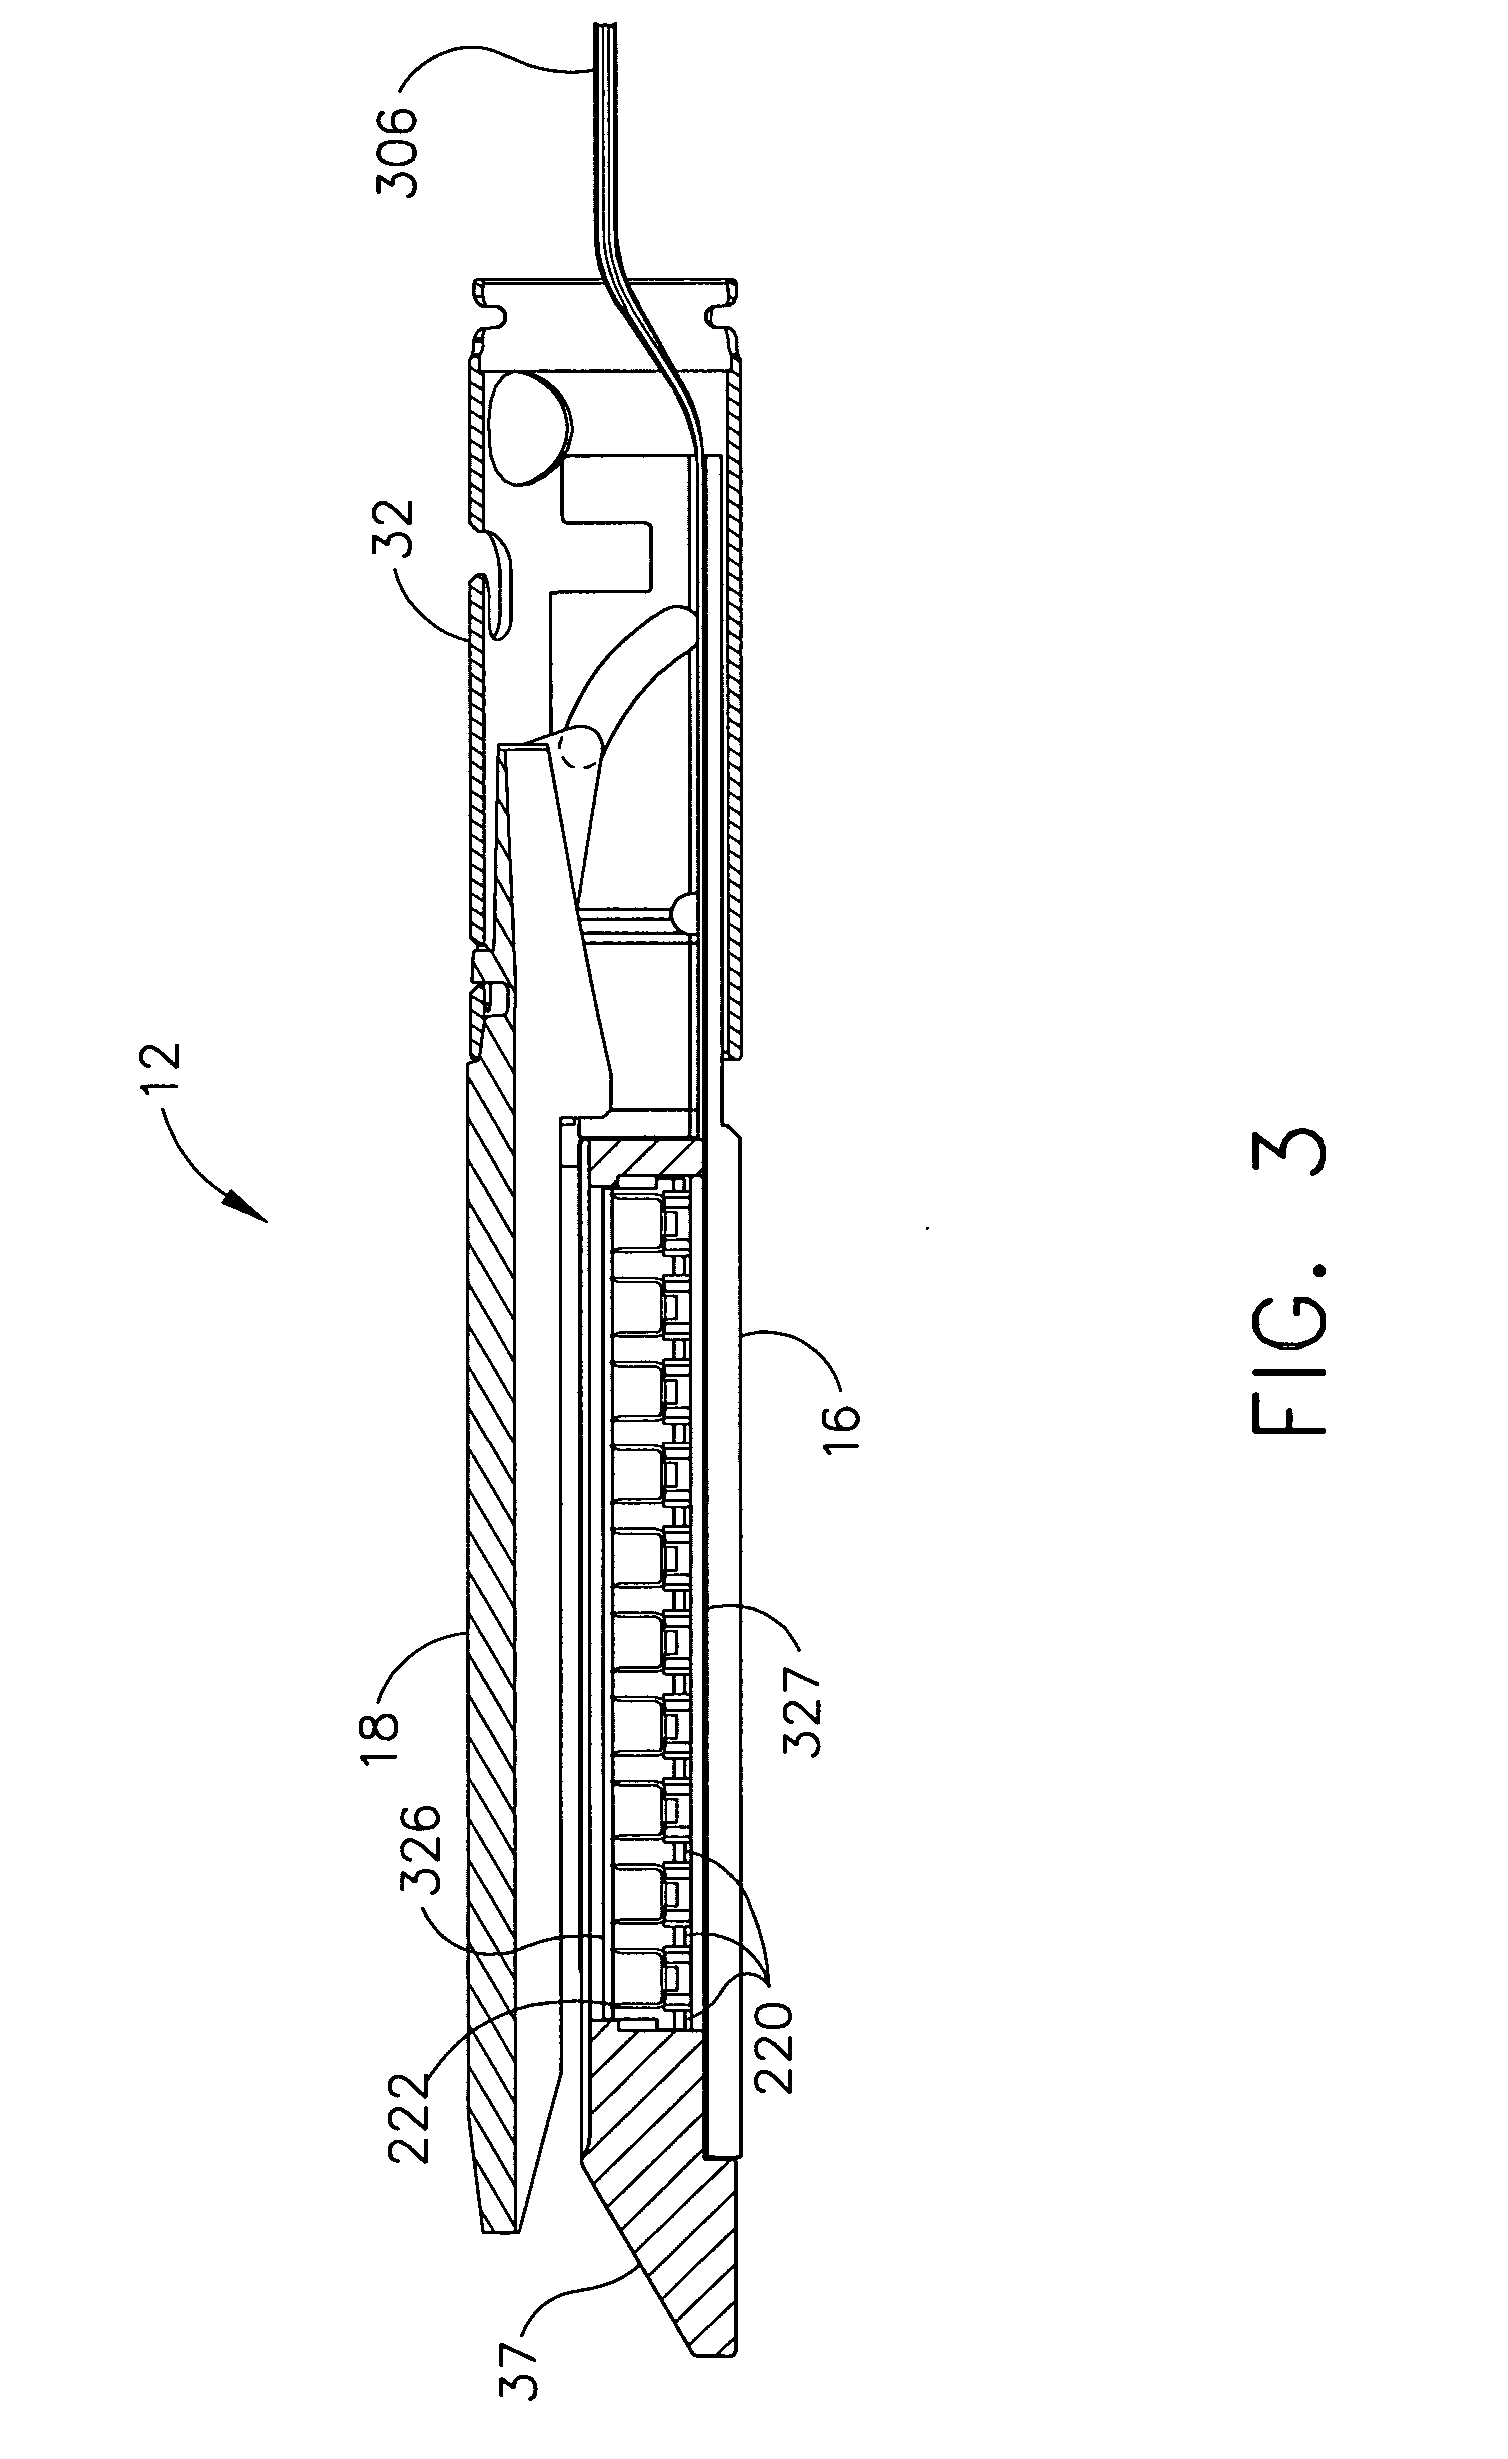 Surgical instrument having a hydraulically actuated end effector